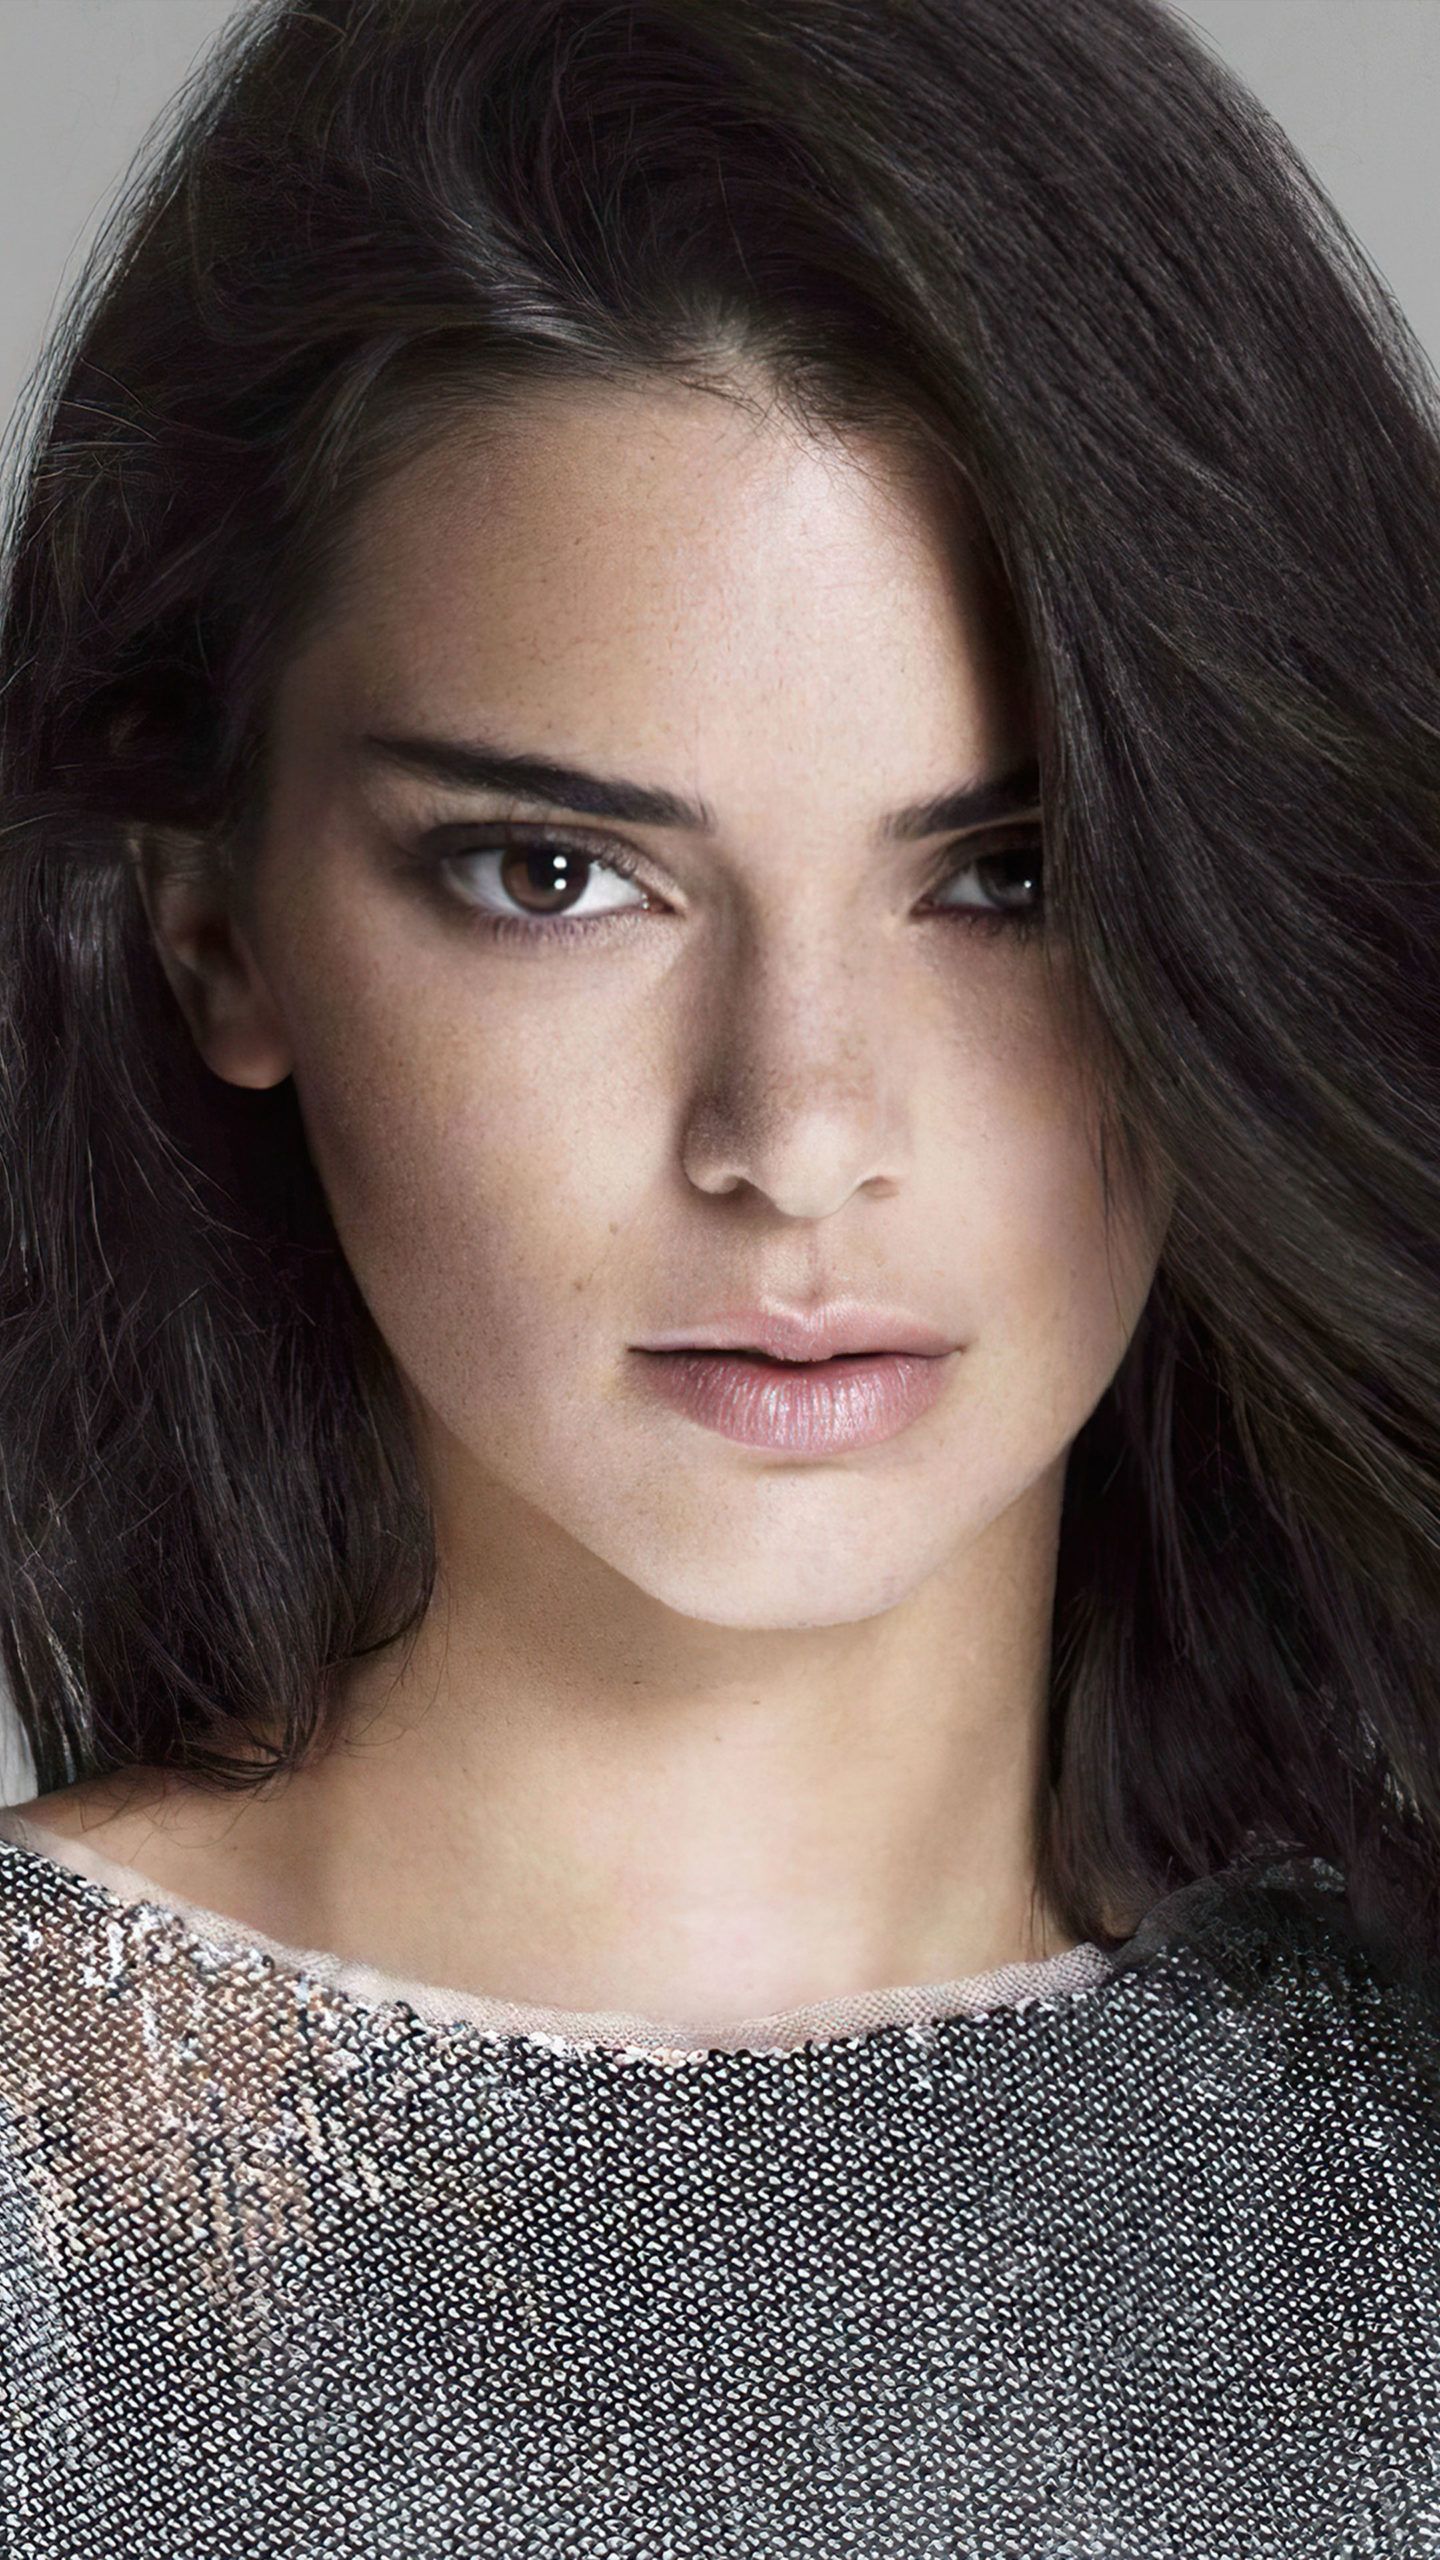 Kendall Jenner 2021 Wallpapers - Wallpaper Cave